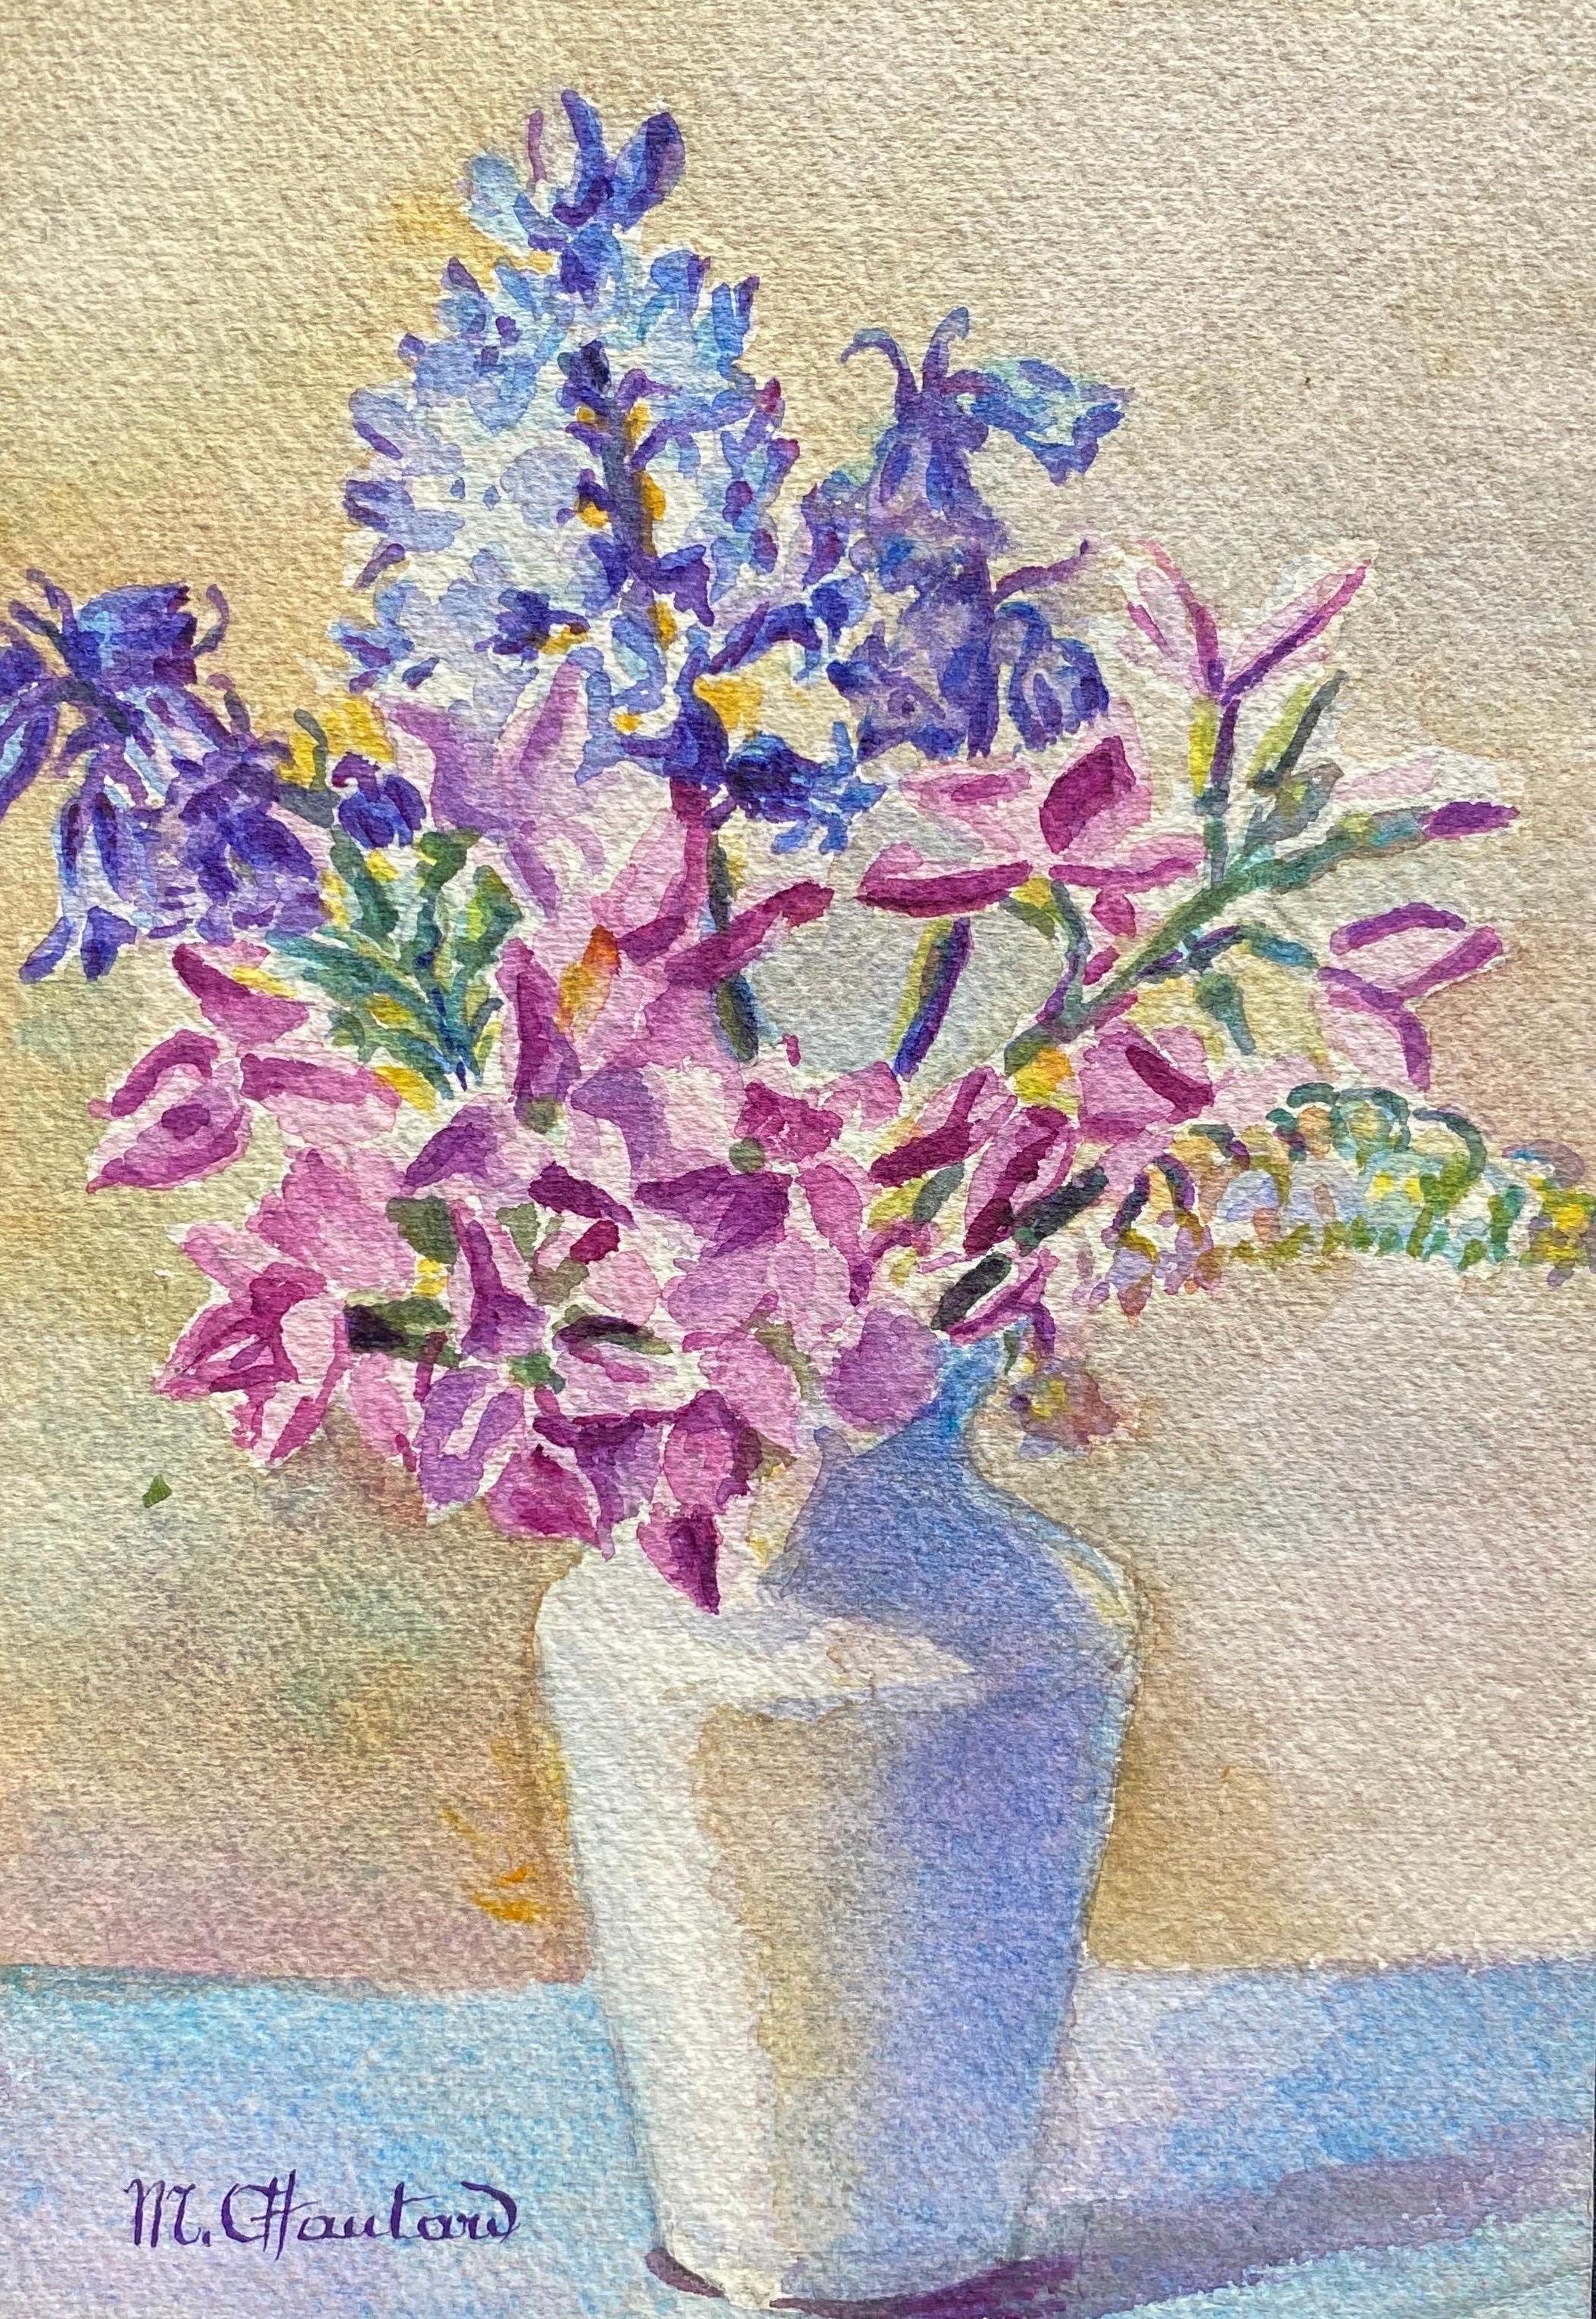 Marie-Amelie Chautard-Carreau Still-Life - Early 1900's French Impressionist Signed Flower Watercolour by Marie Carreau